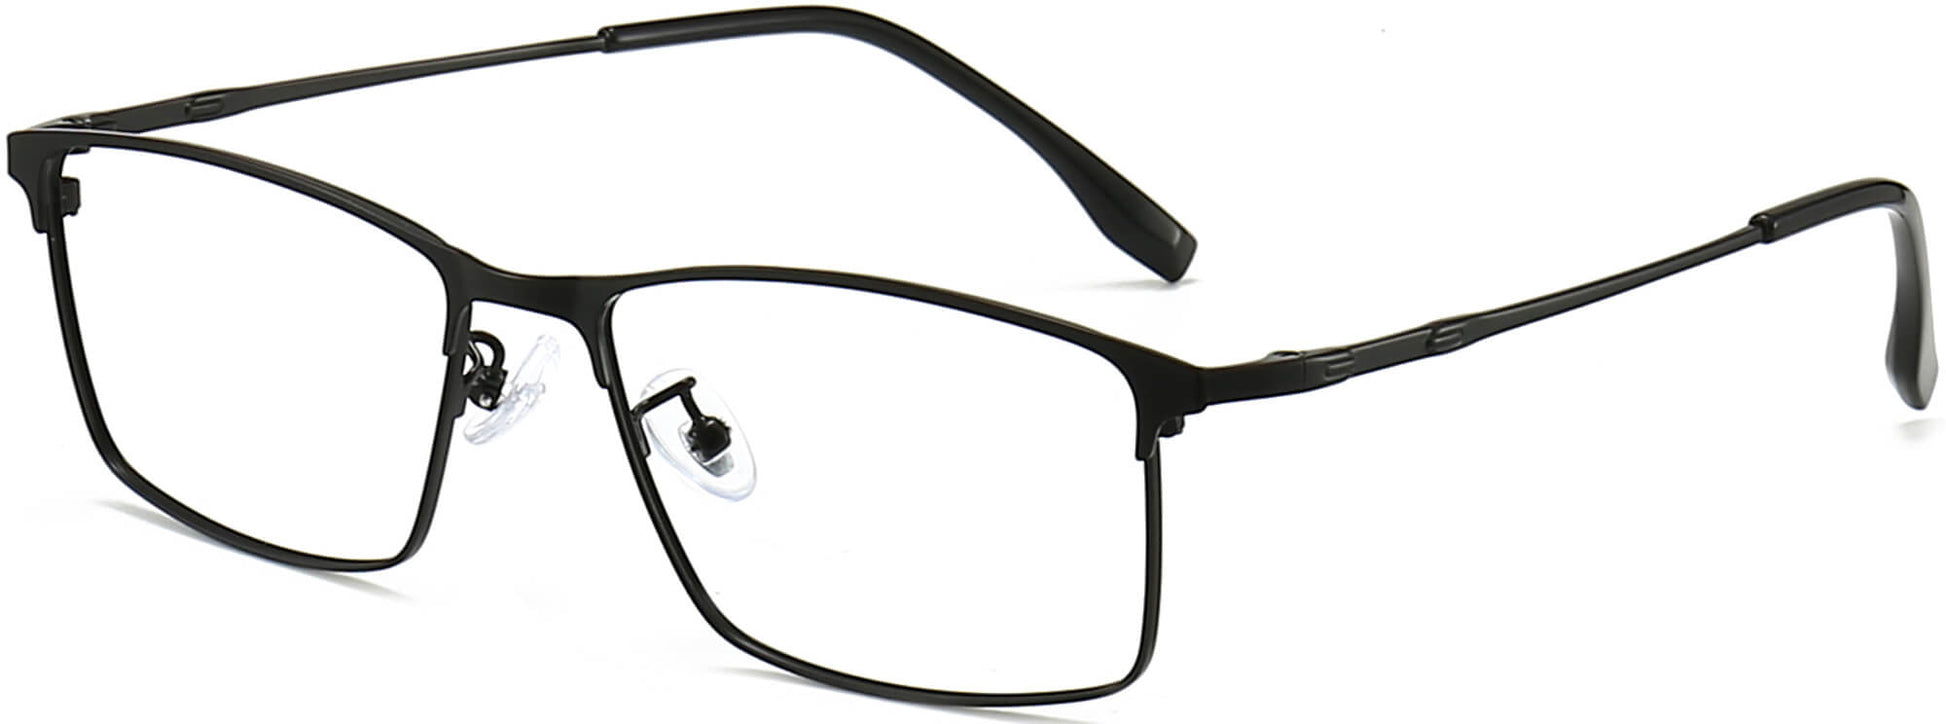 Ty Square Black Eyeglasses from ANRRI, angle view